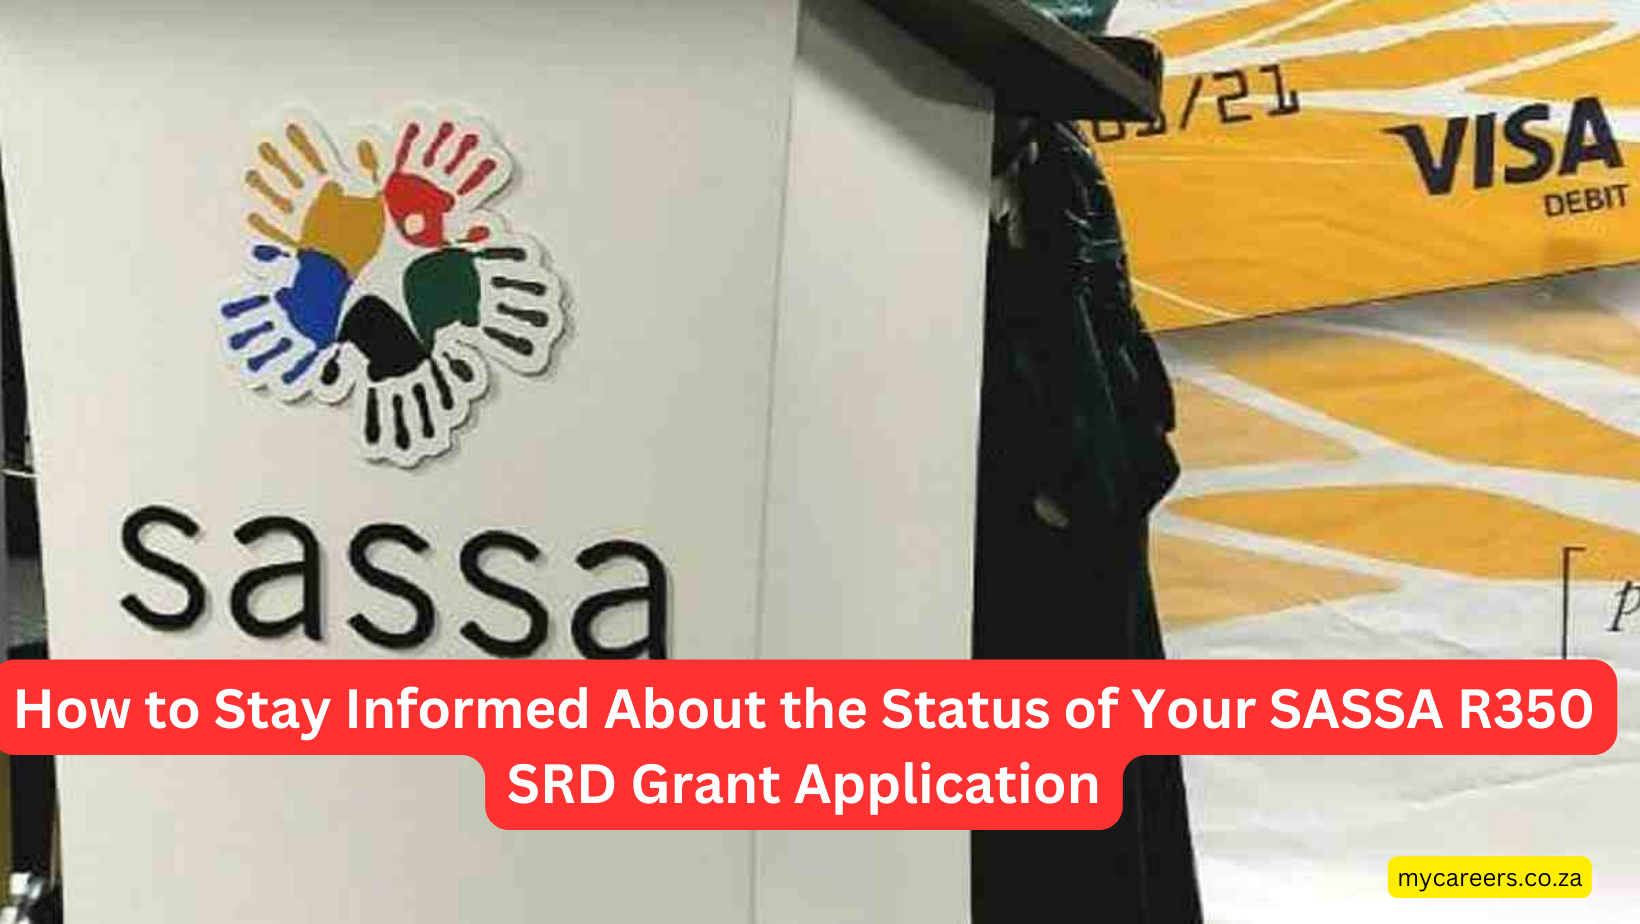 <strong>How to Stay Informed About the Status of Your SASSA R350 SRD Grant Application</strong>